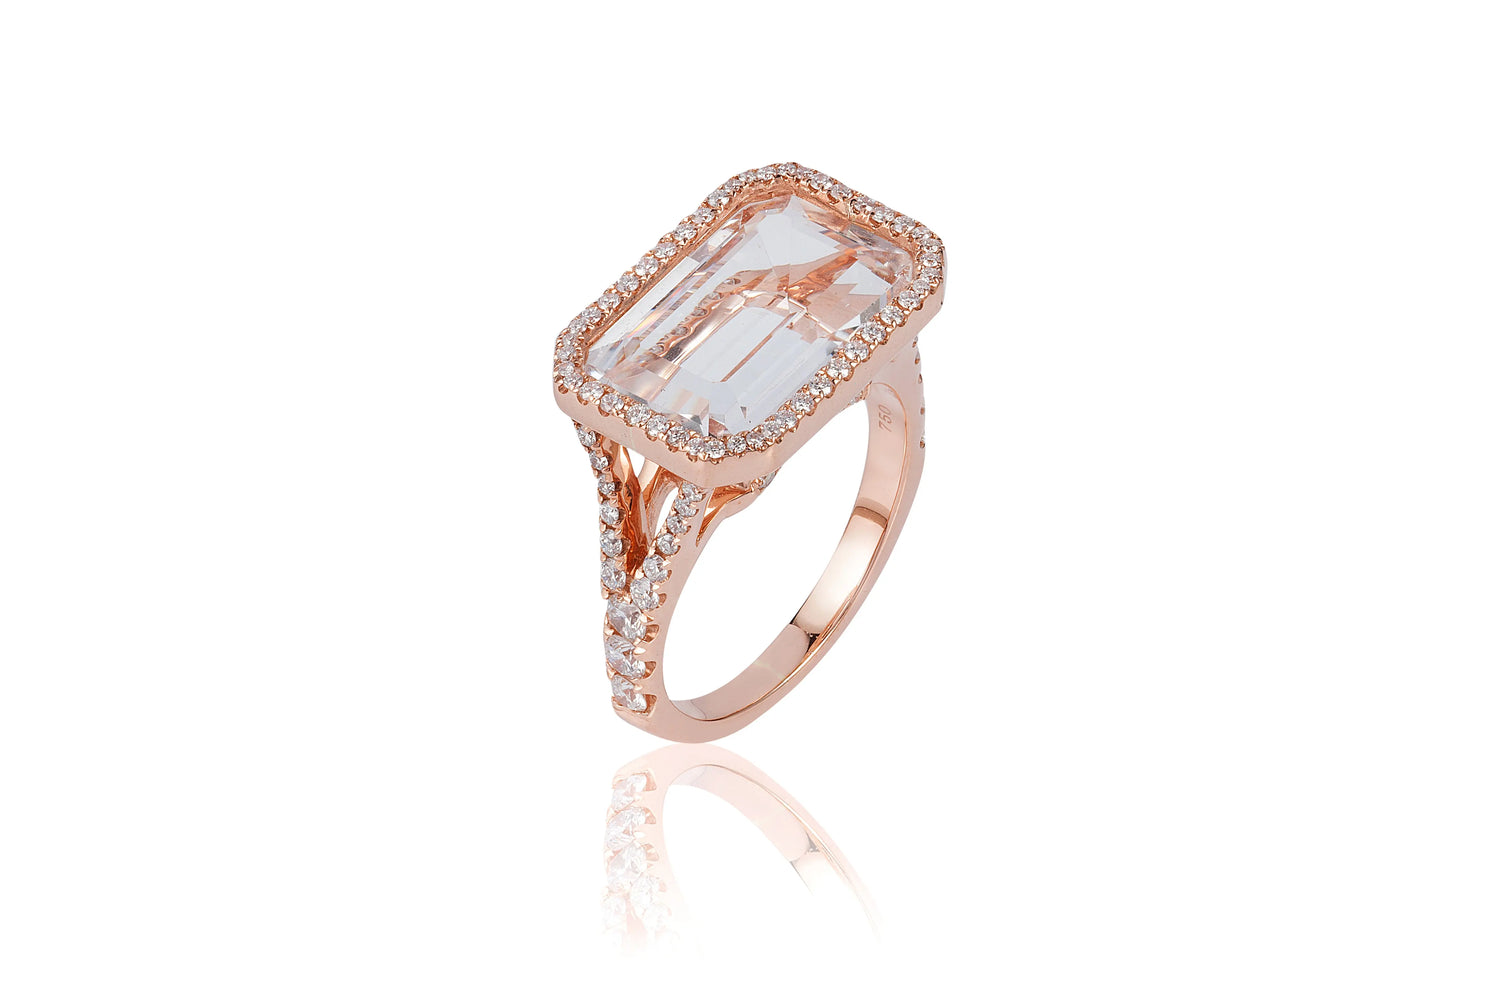 Gossip' Rock Crystal East West Emerald Cut Ring With Diamonds in 18K Pink Gold. The stone size is ~ 10 x 15 mm. The Rock Crystal is ~ 6.92 cttw and the Diamond ~ 0.54 cttw.